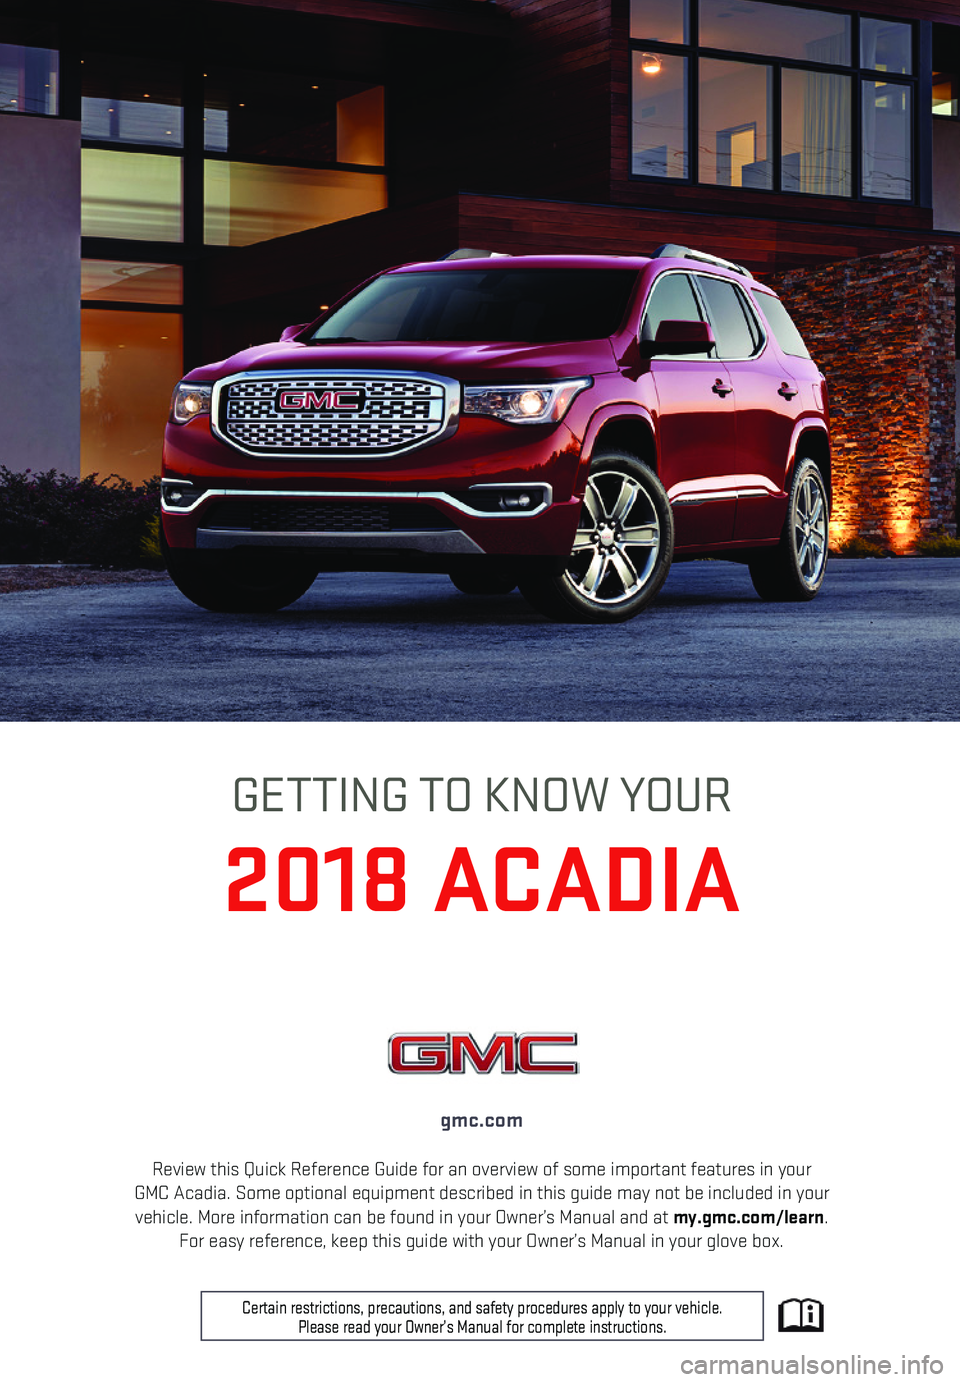 GMC ACADIA 2018  Get To Know Guide Review this Quick Reference Guide for an overview of some important feat\
ures in your GMC Acadia. Some optional equipment described in this guide may not be i\
ncluded in your vehicle. More informati